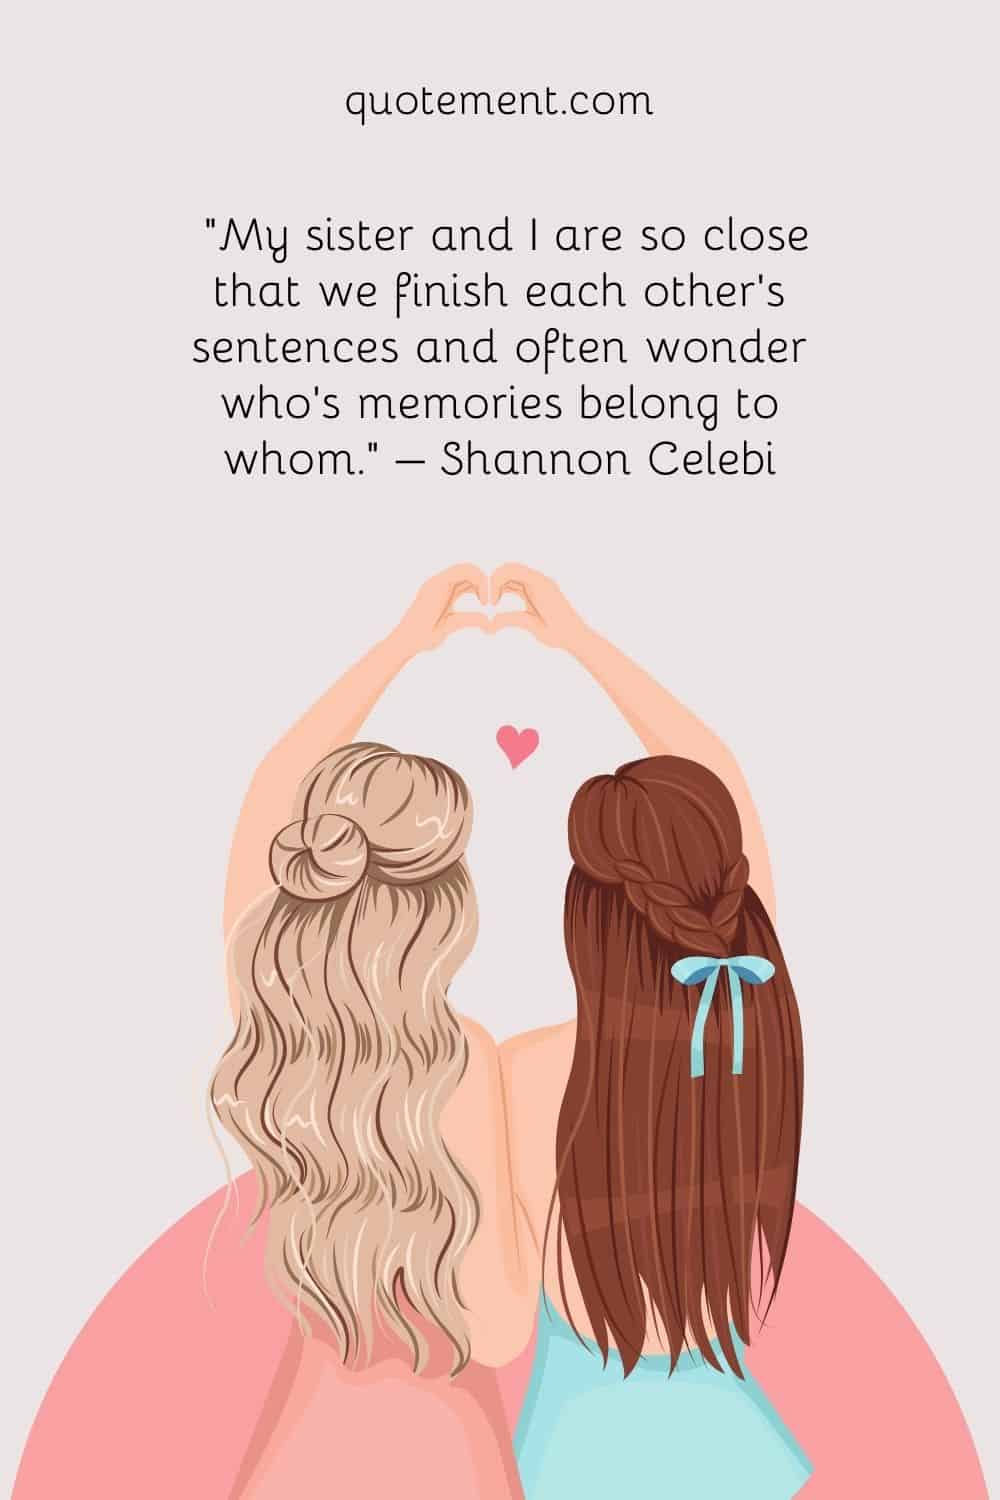 “My sister and I are so close that we finish each other’s sentences and often wonder who’s memories belong to whom.” – Shannon Celebi